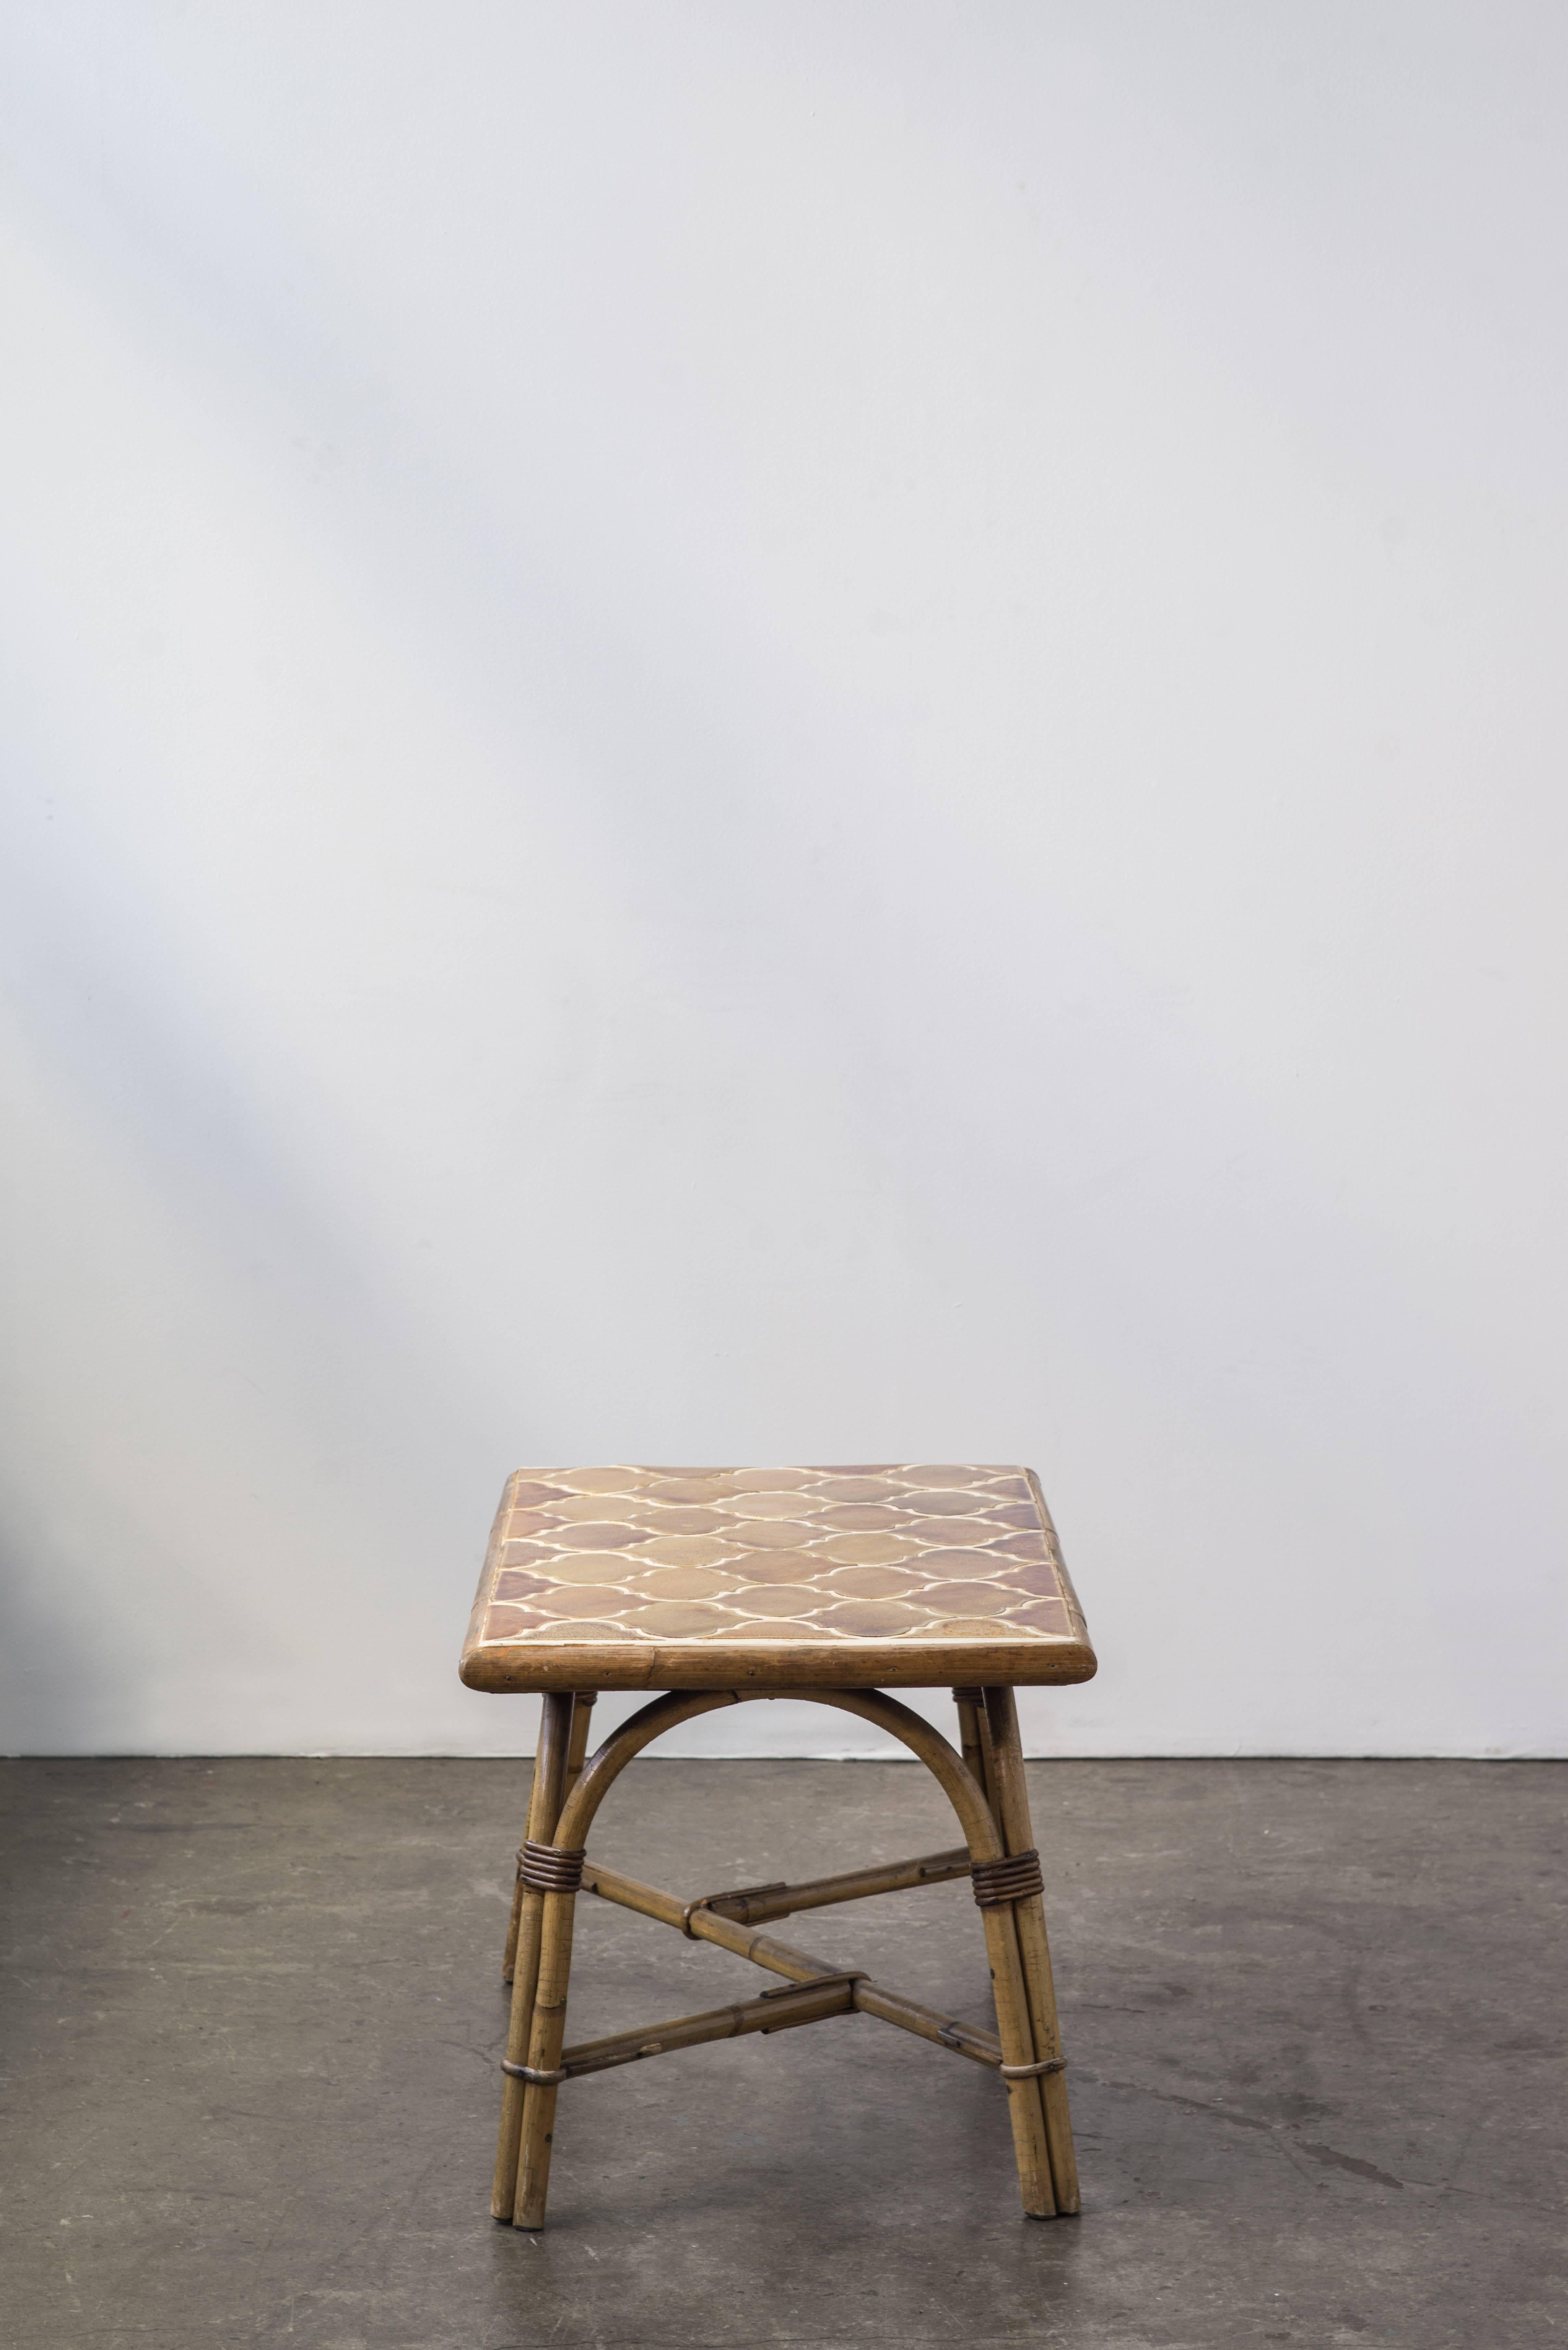 A rare ceramic mosaic table with a rattan frame by Adrien Audoux and Frida Minet.